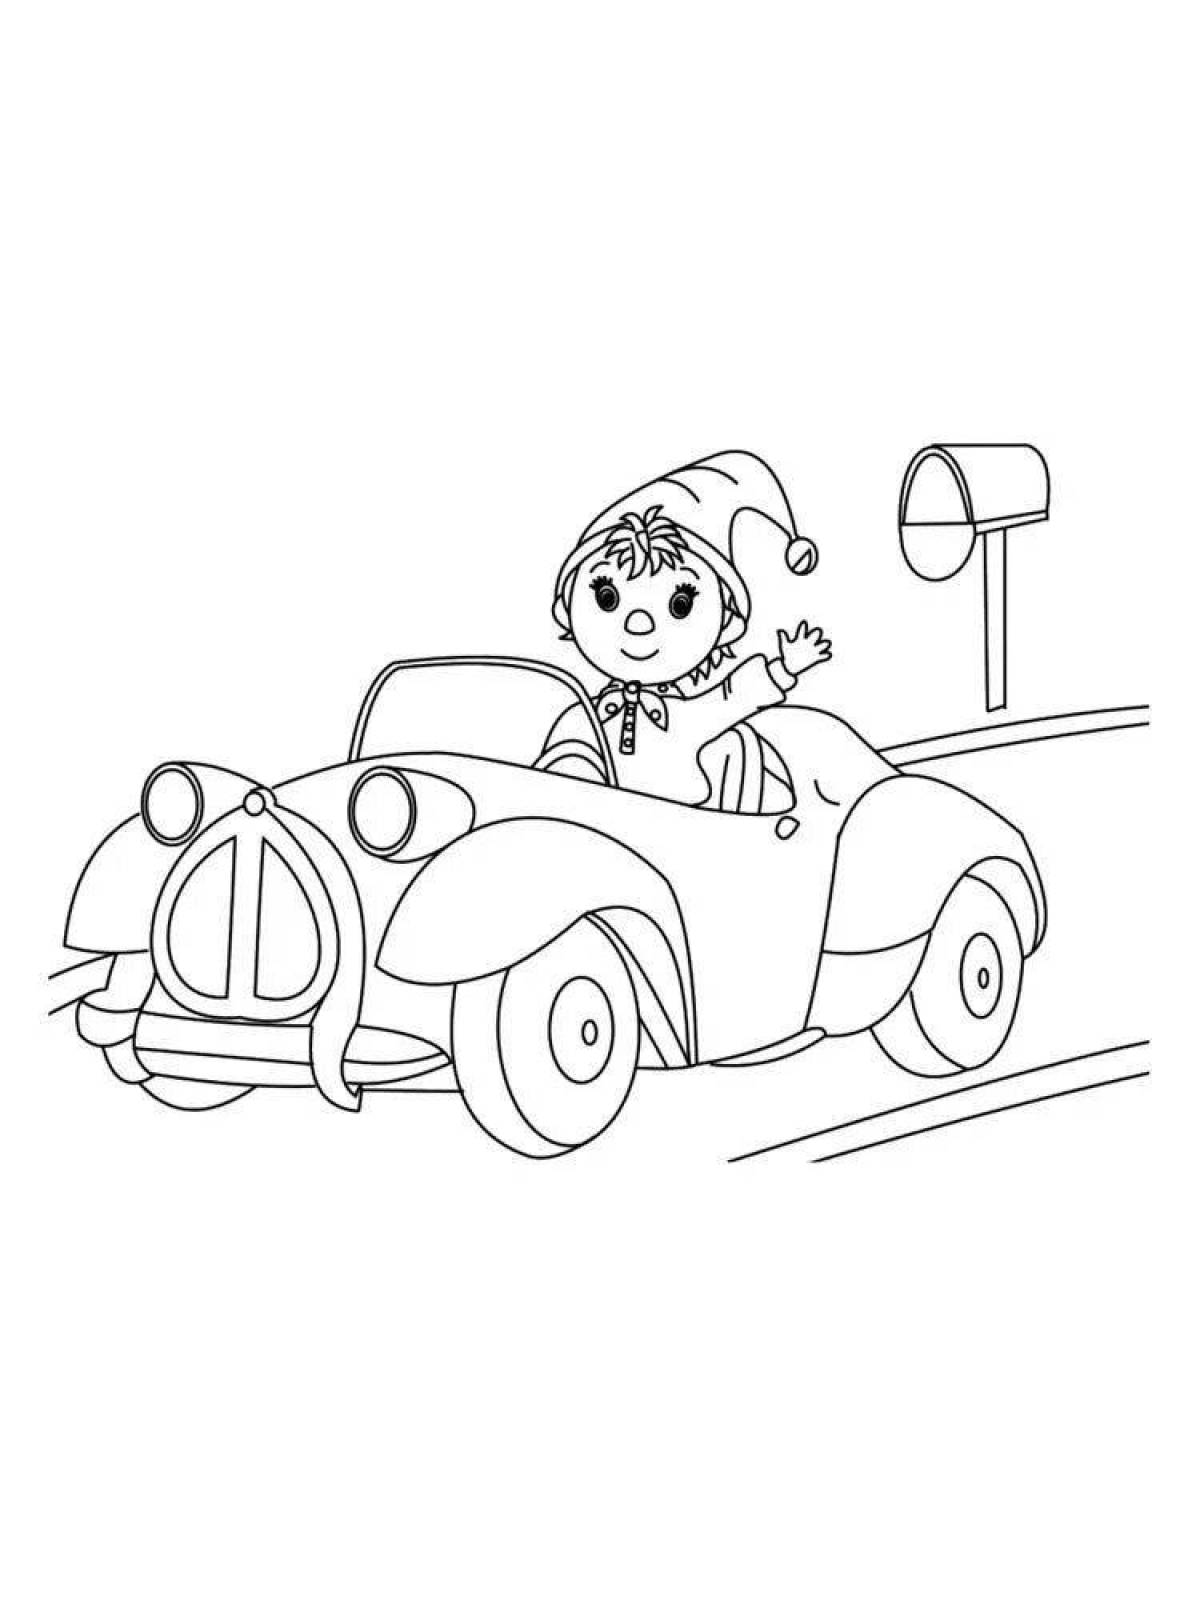 Coloring page cheerful driver